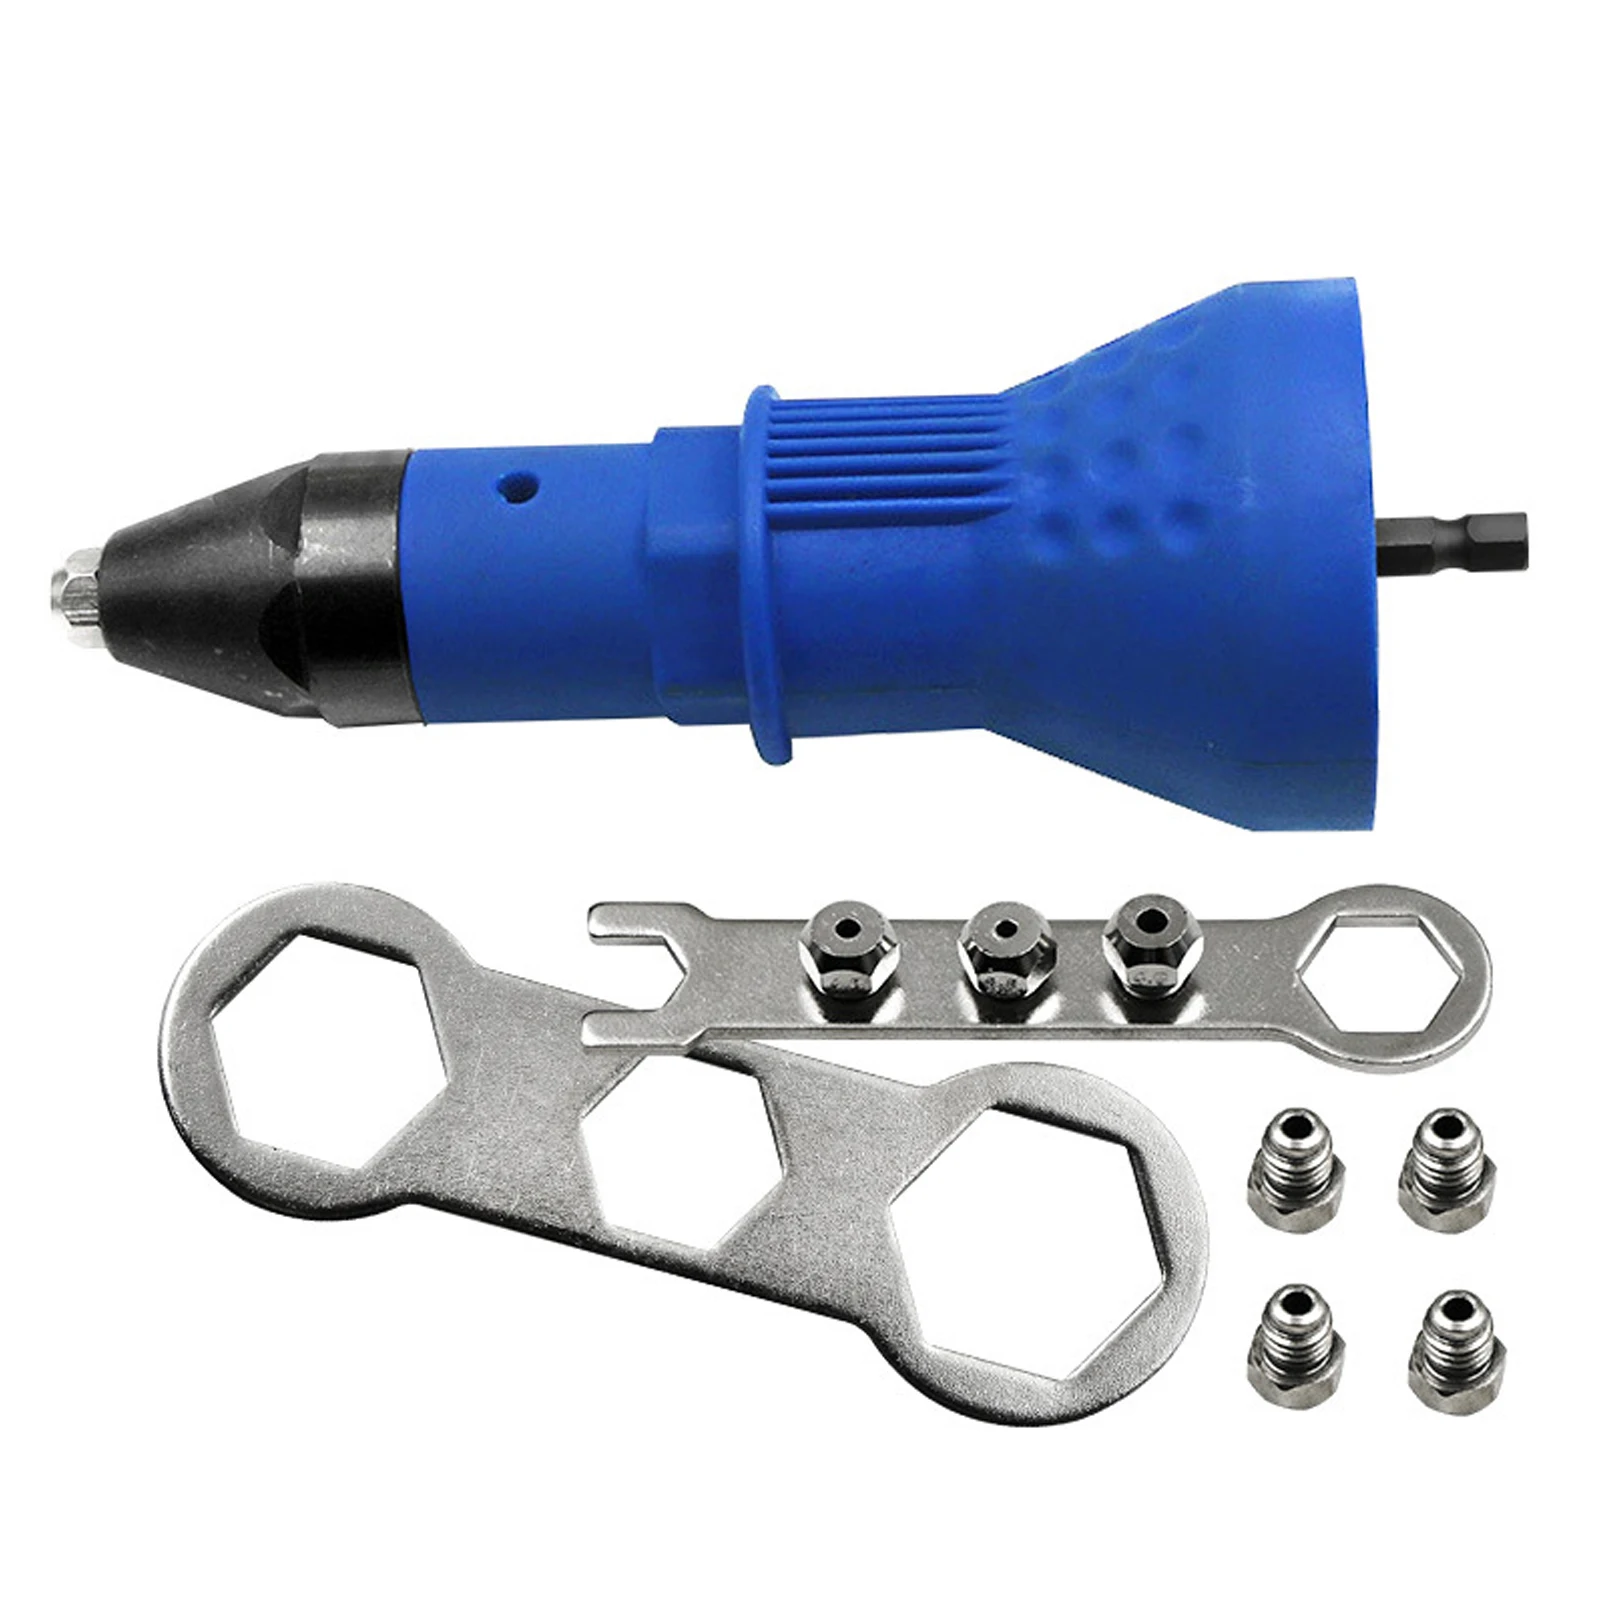 

Plastic 16.1x5.8cm Screwdrivers Quick Easy Electric Tool Blue Blind Nut For Cordless Rivet Drill Adapter Professional Attachment